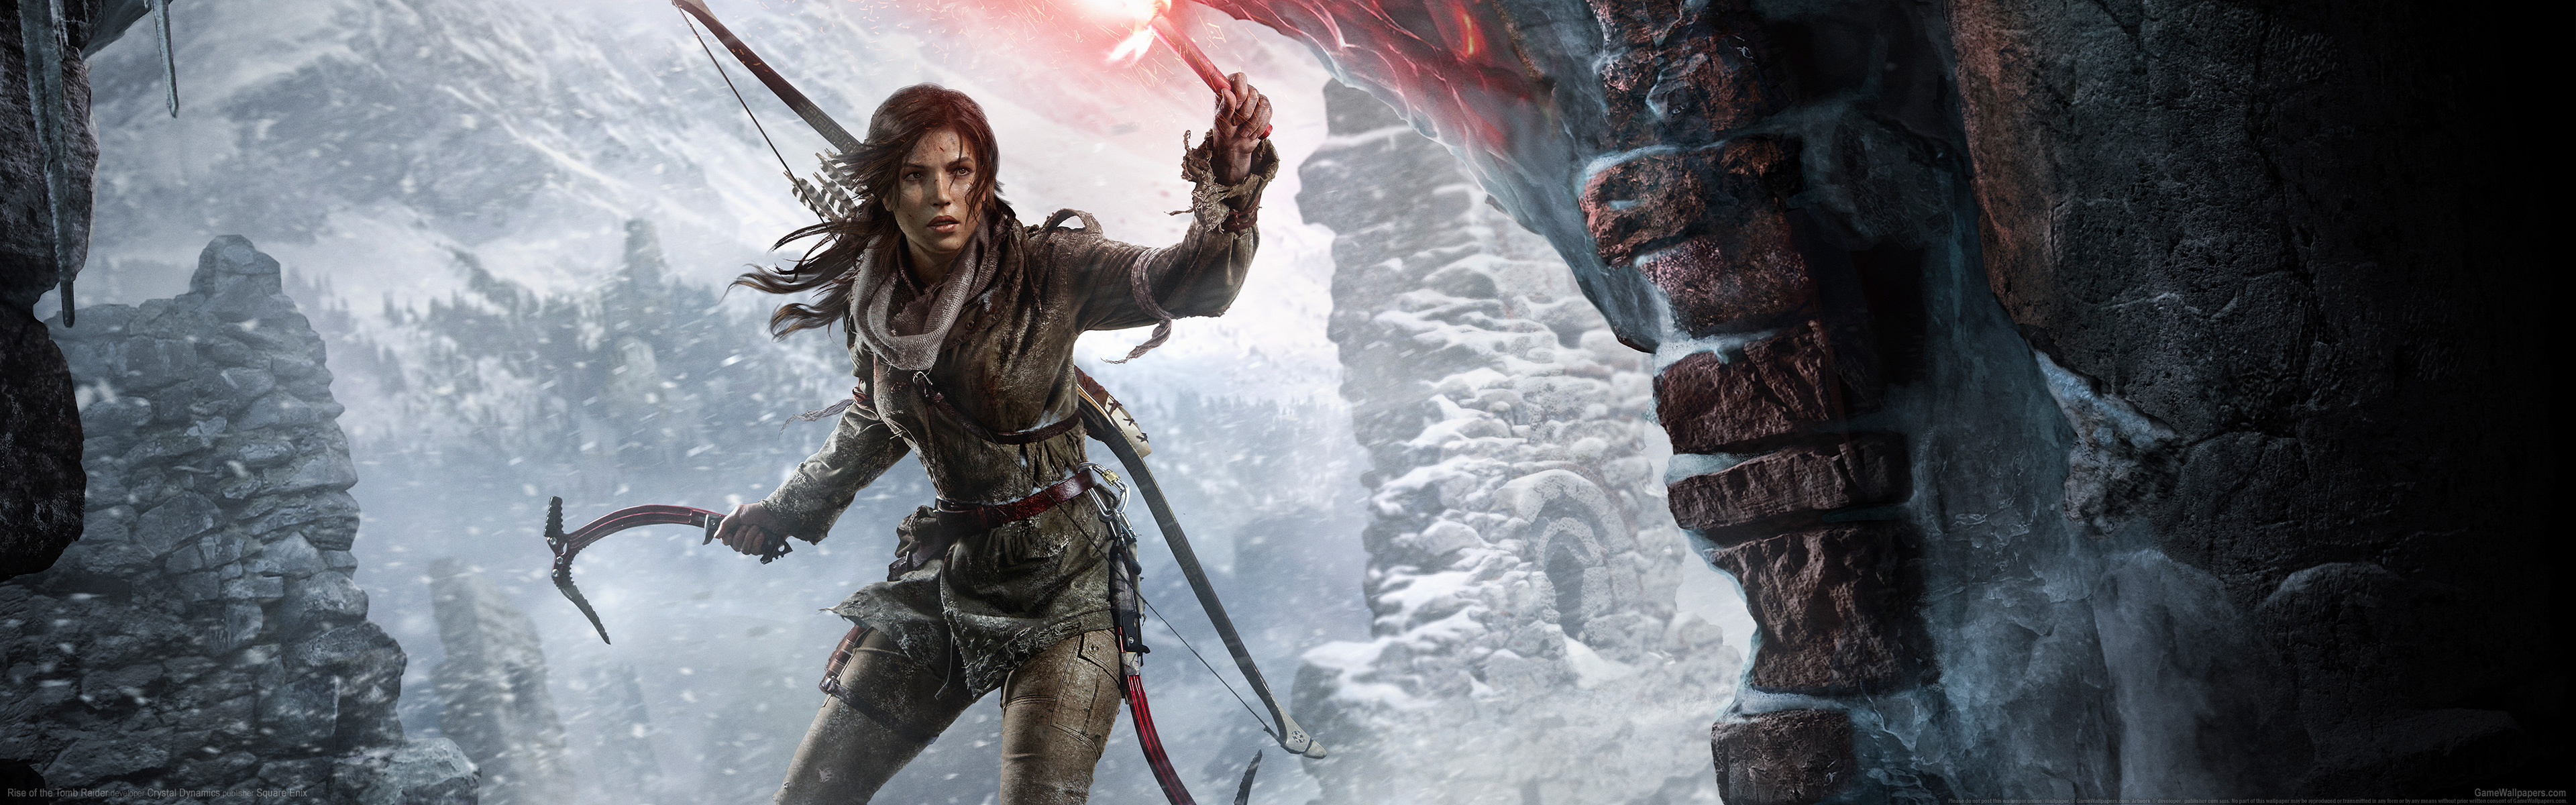 Rise of the Tomb Raider wallpaper 11 3840x1200